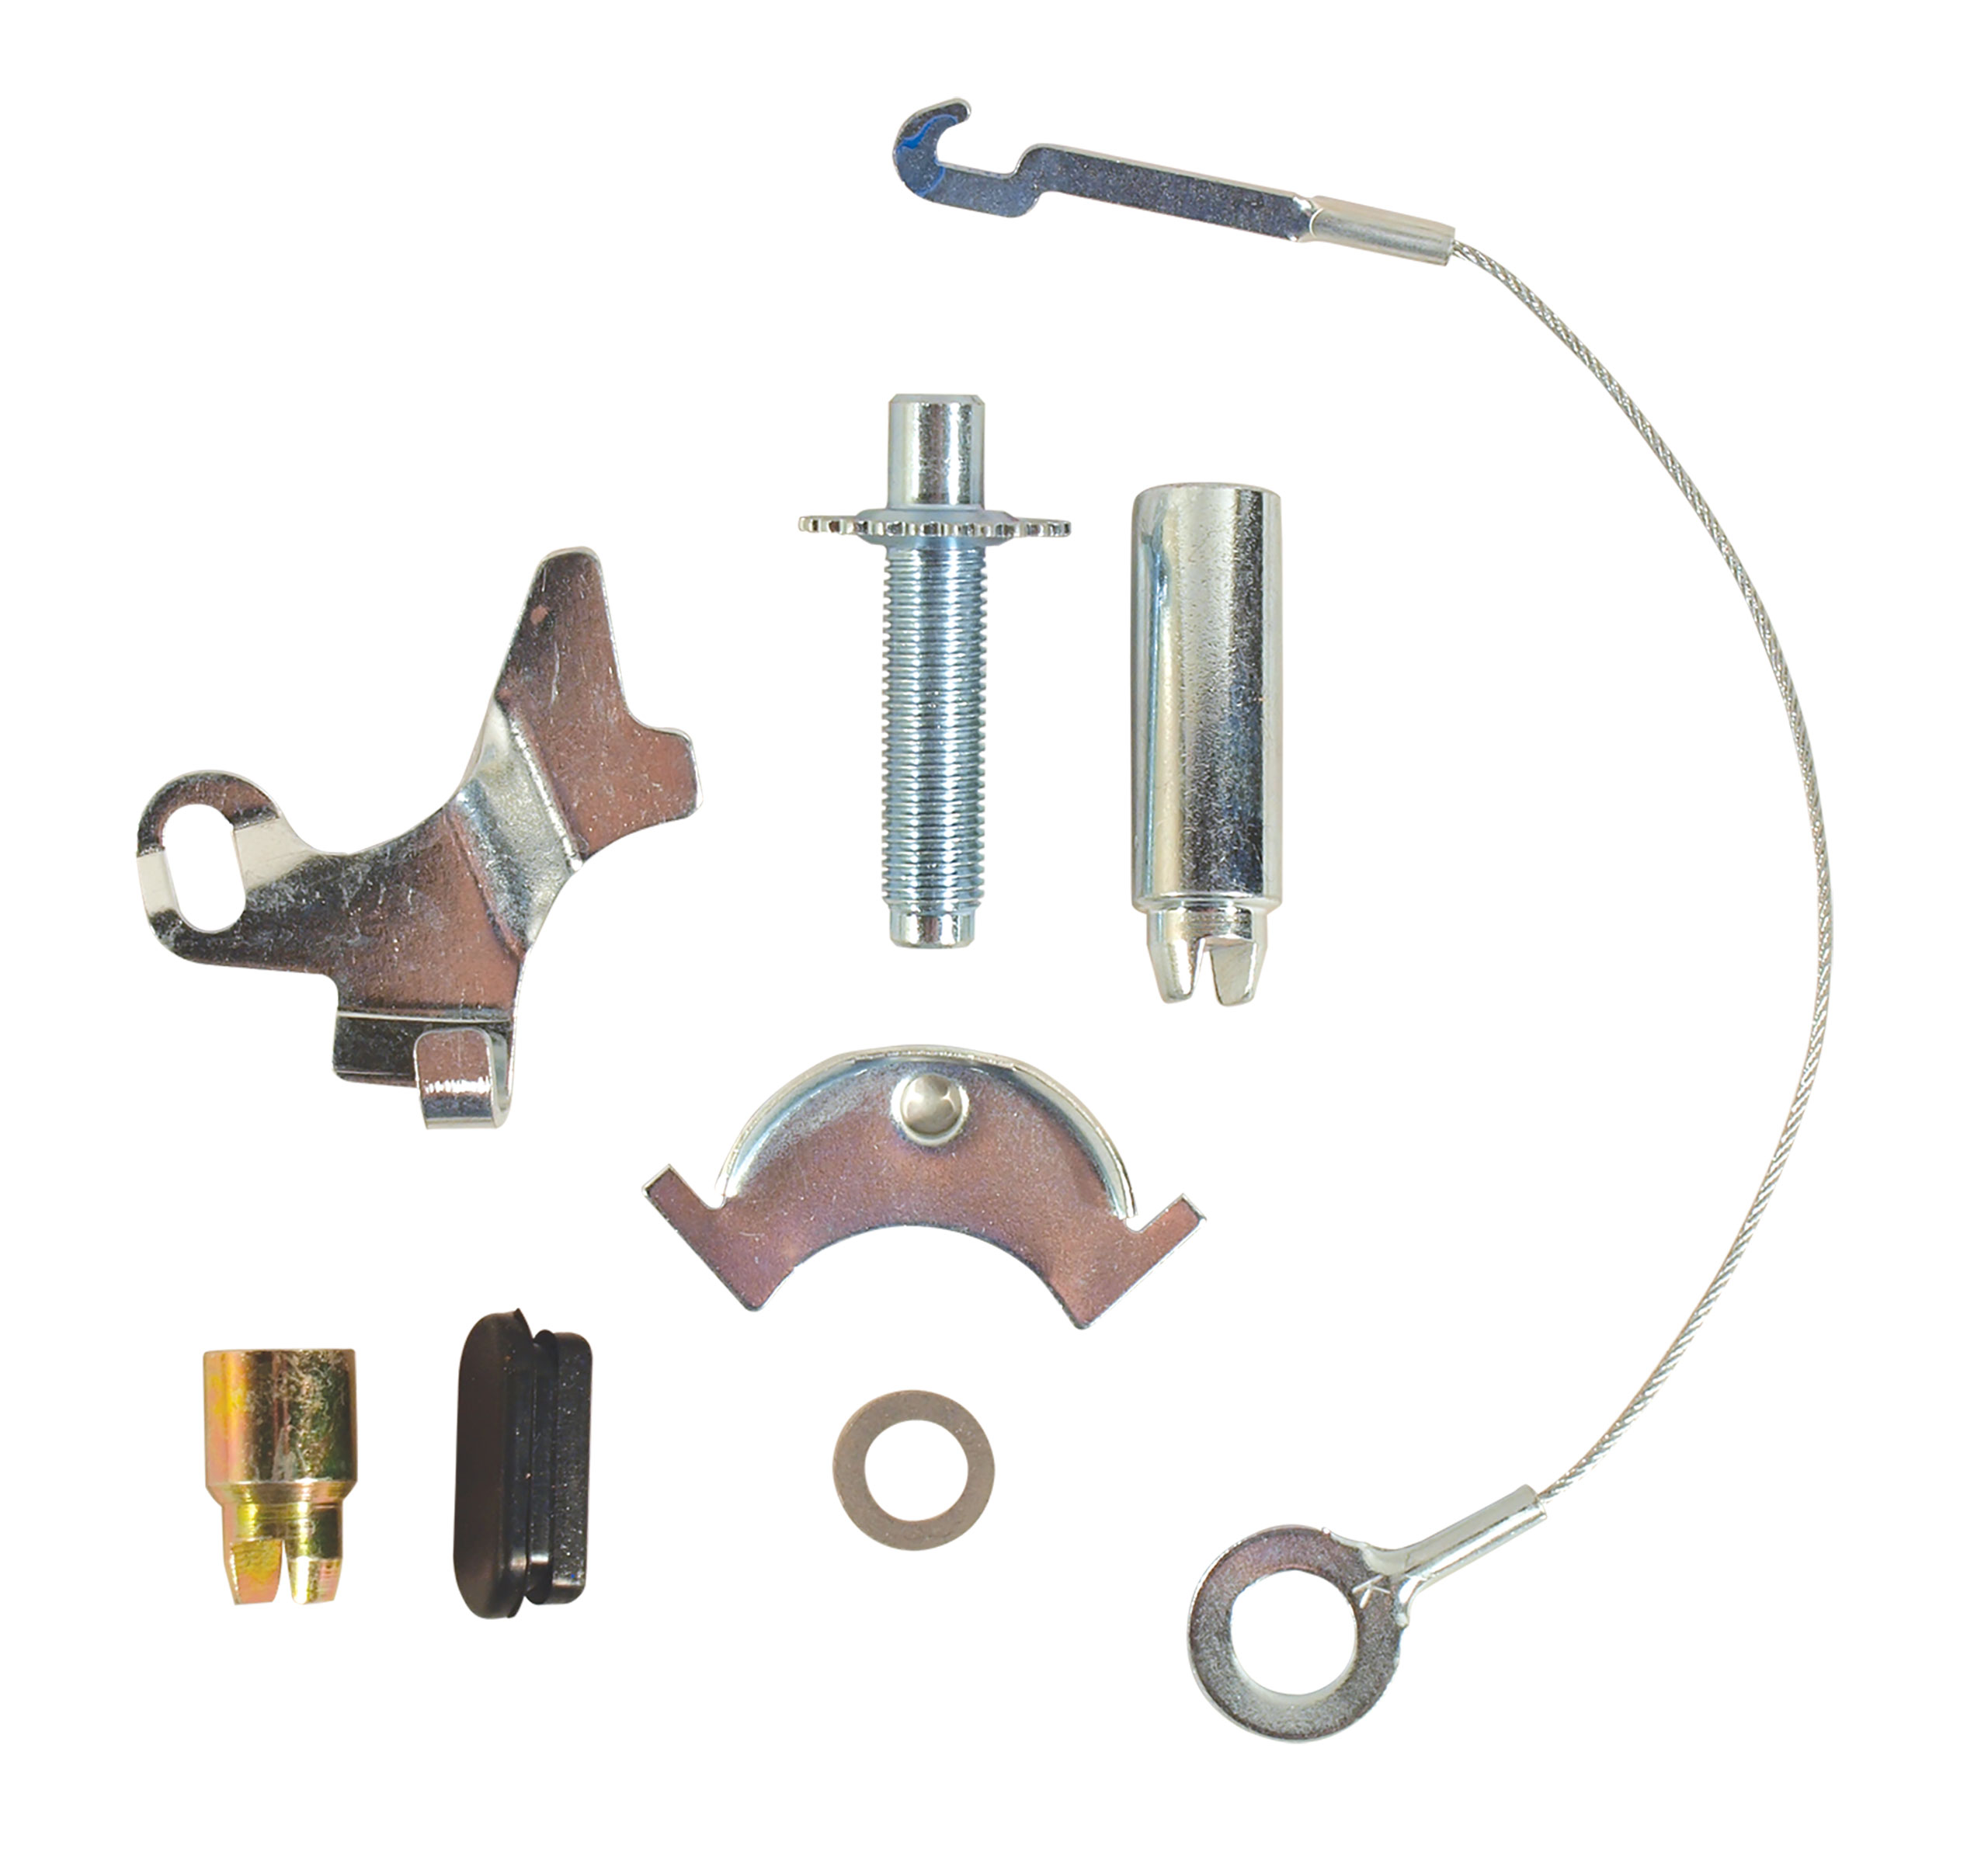 Auto Accessories of America 1964-1970 Ford Mustang Brake Shoe Self Adjuster Repair Kit - Front or Rear LH - V8